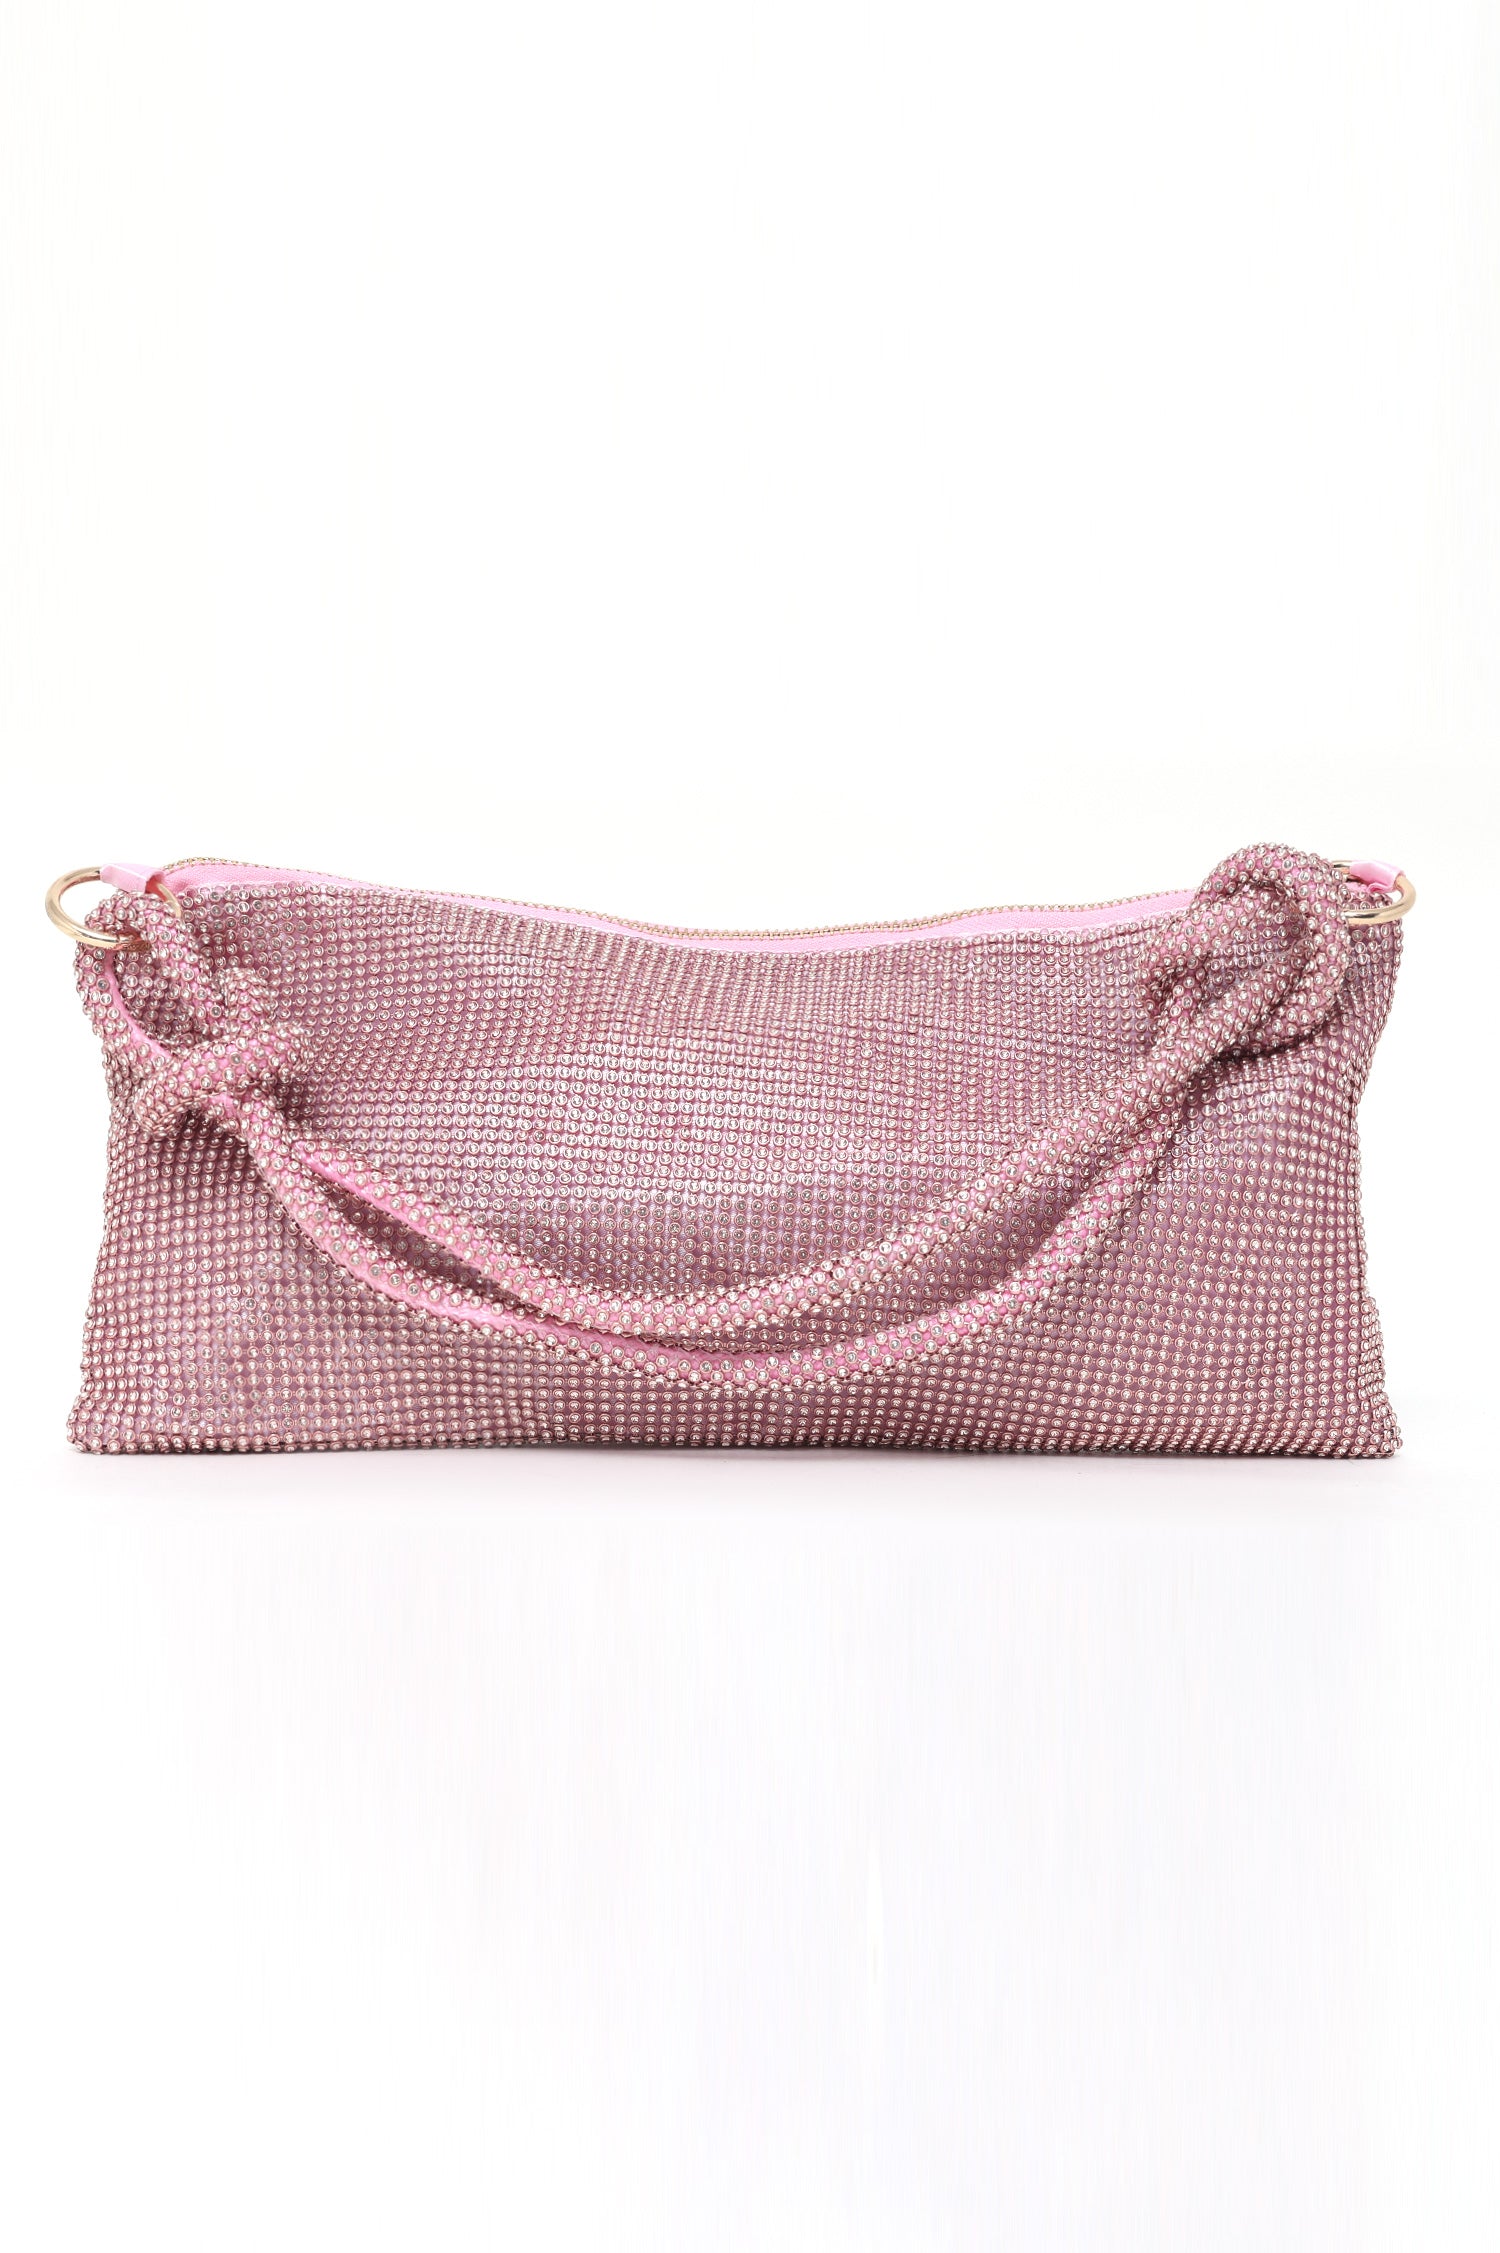 BLING BAG WITH STRAP-PINK